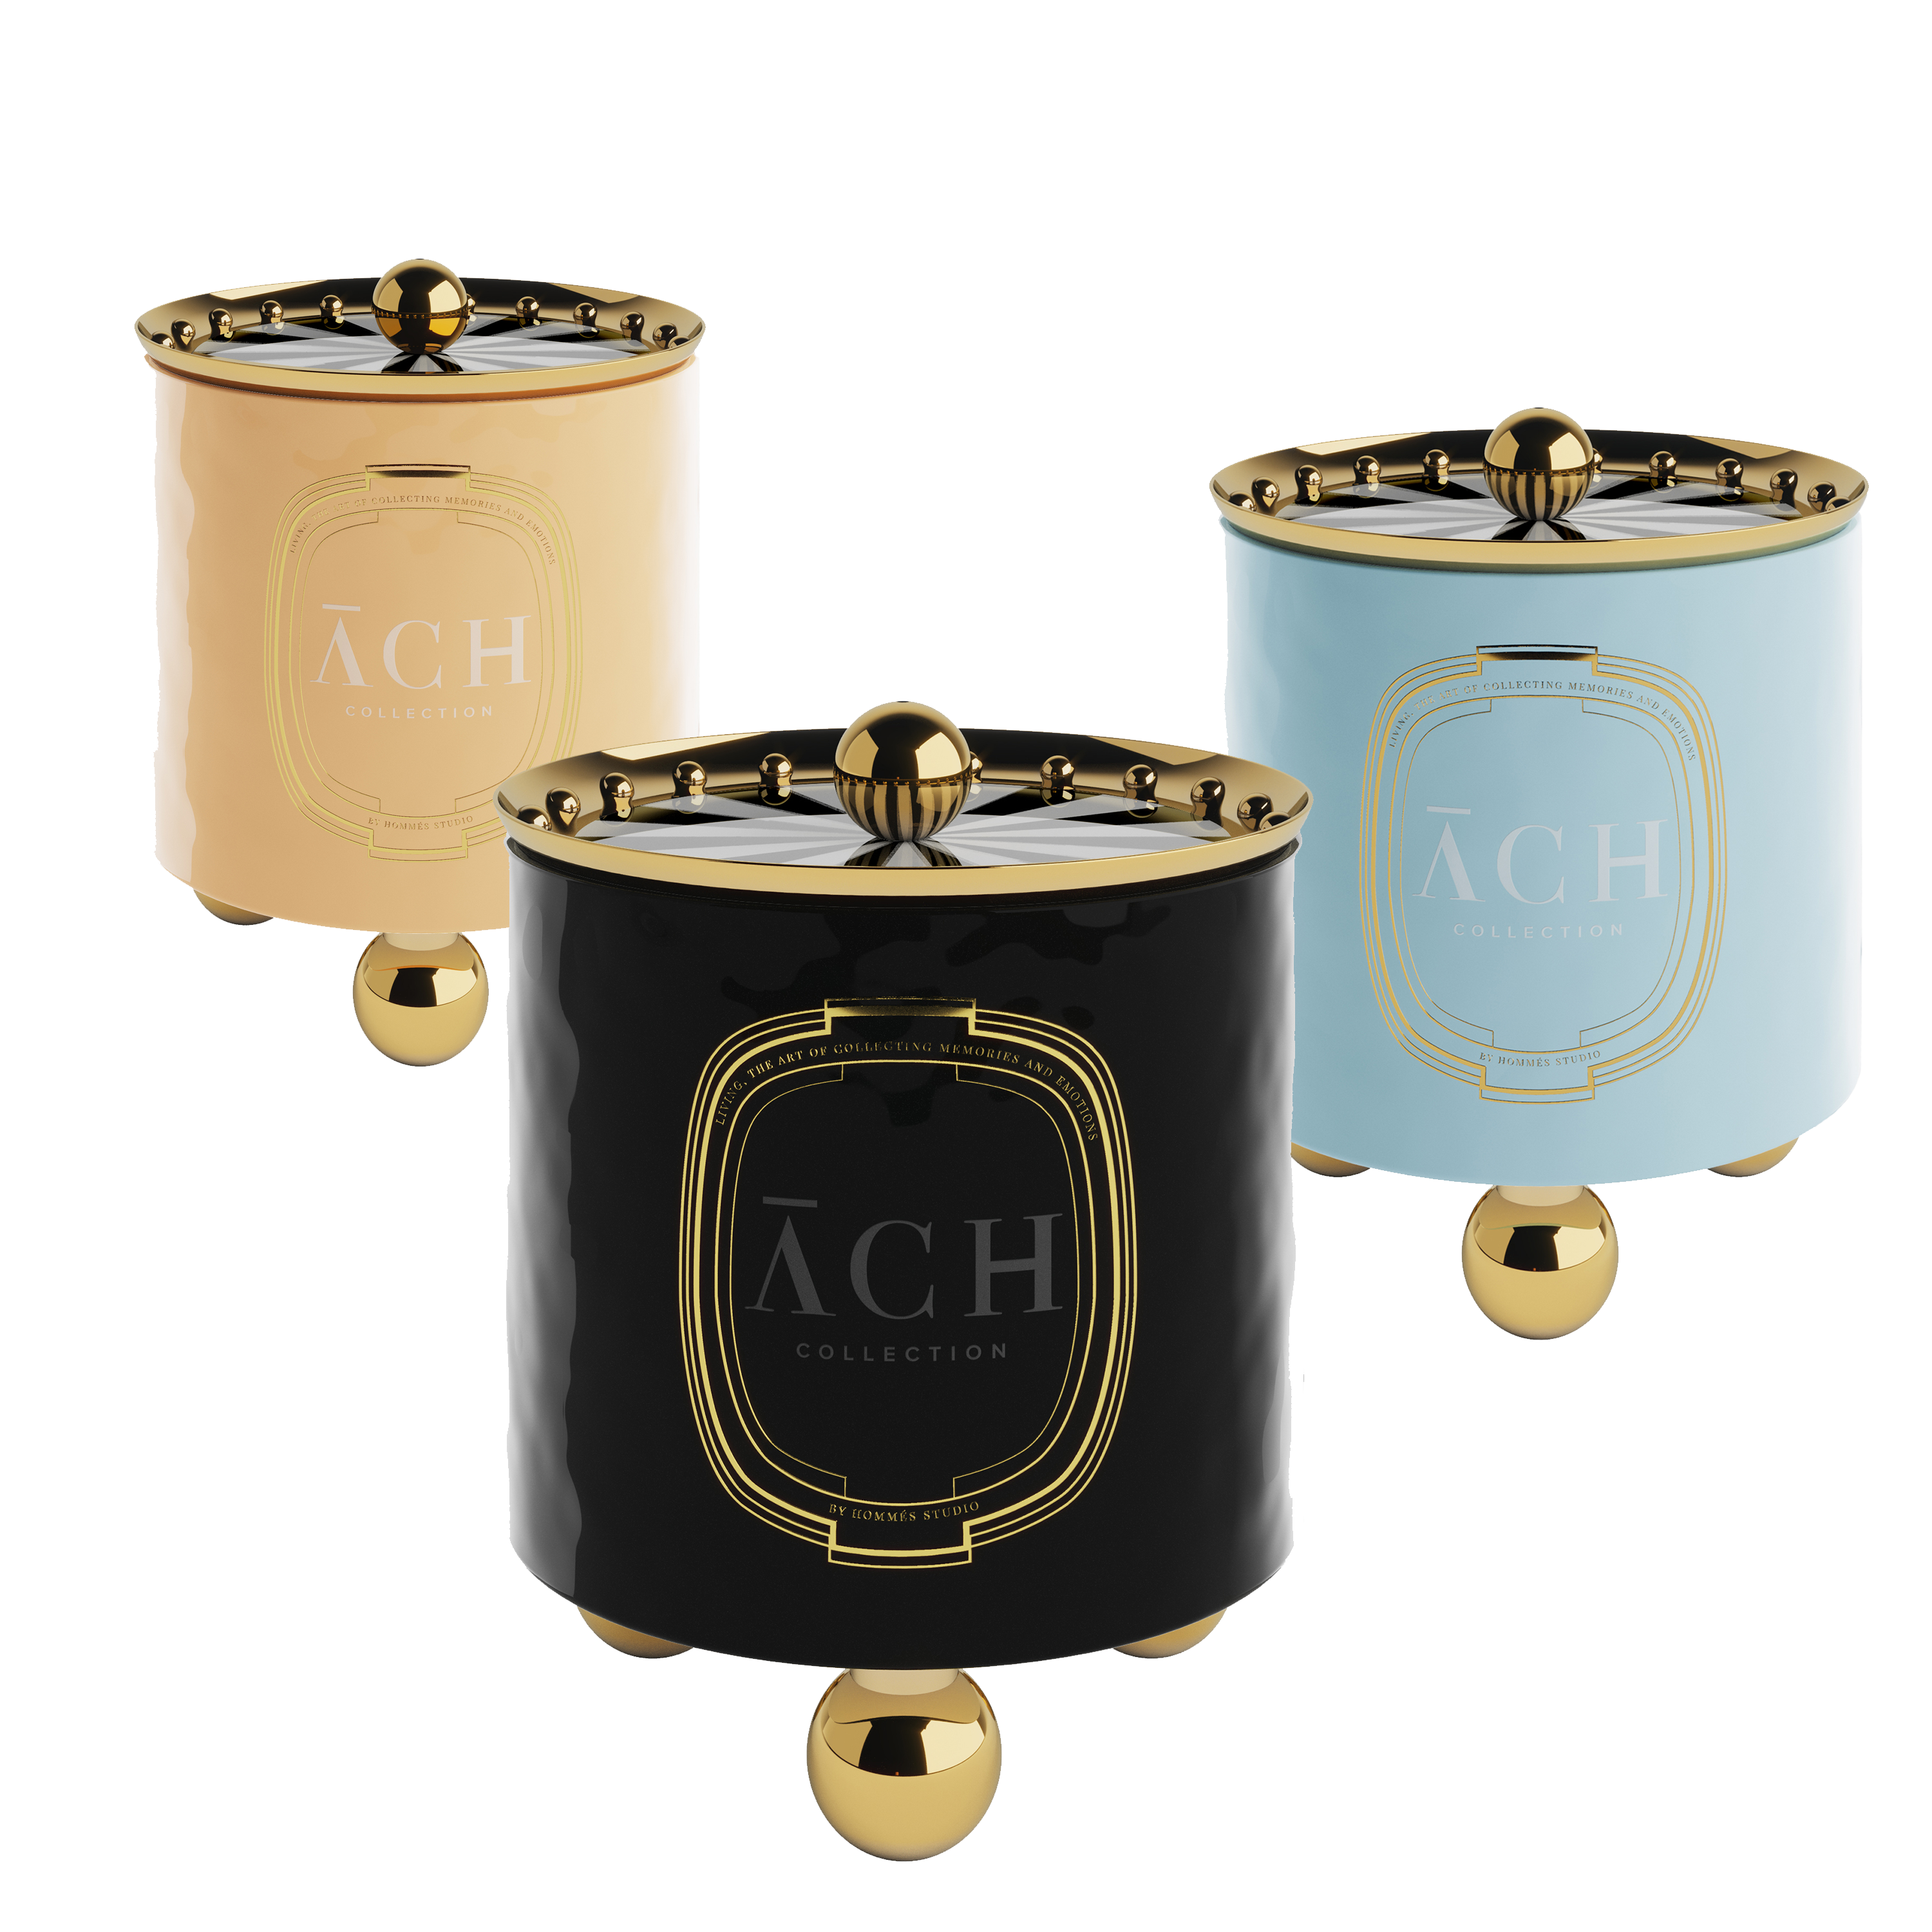 ACH Collection - Home Shelter Series - Achi candle